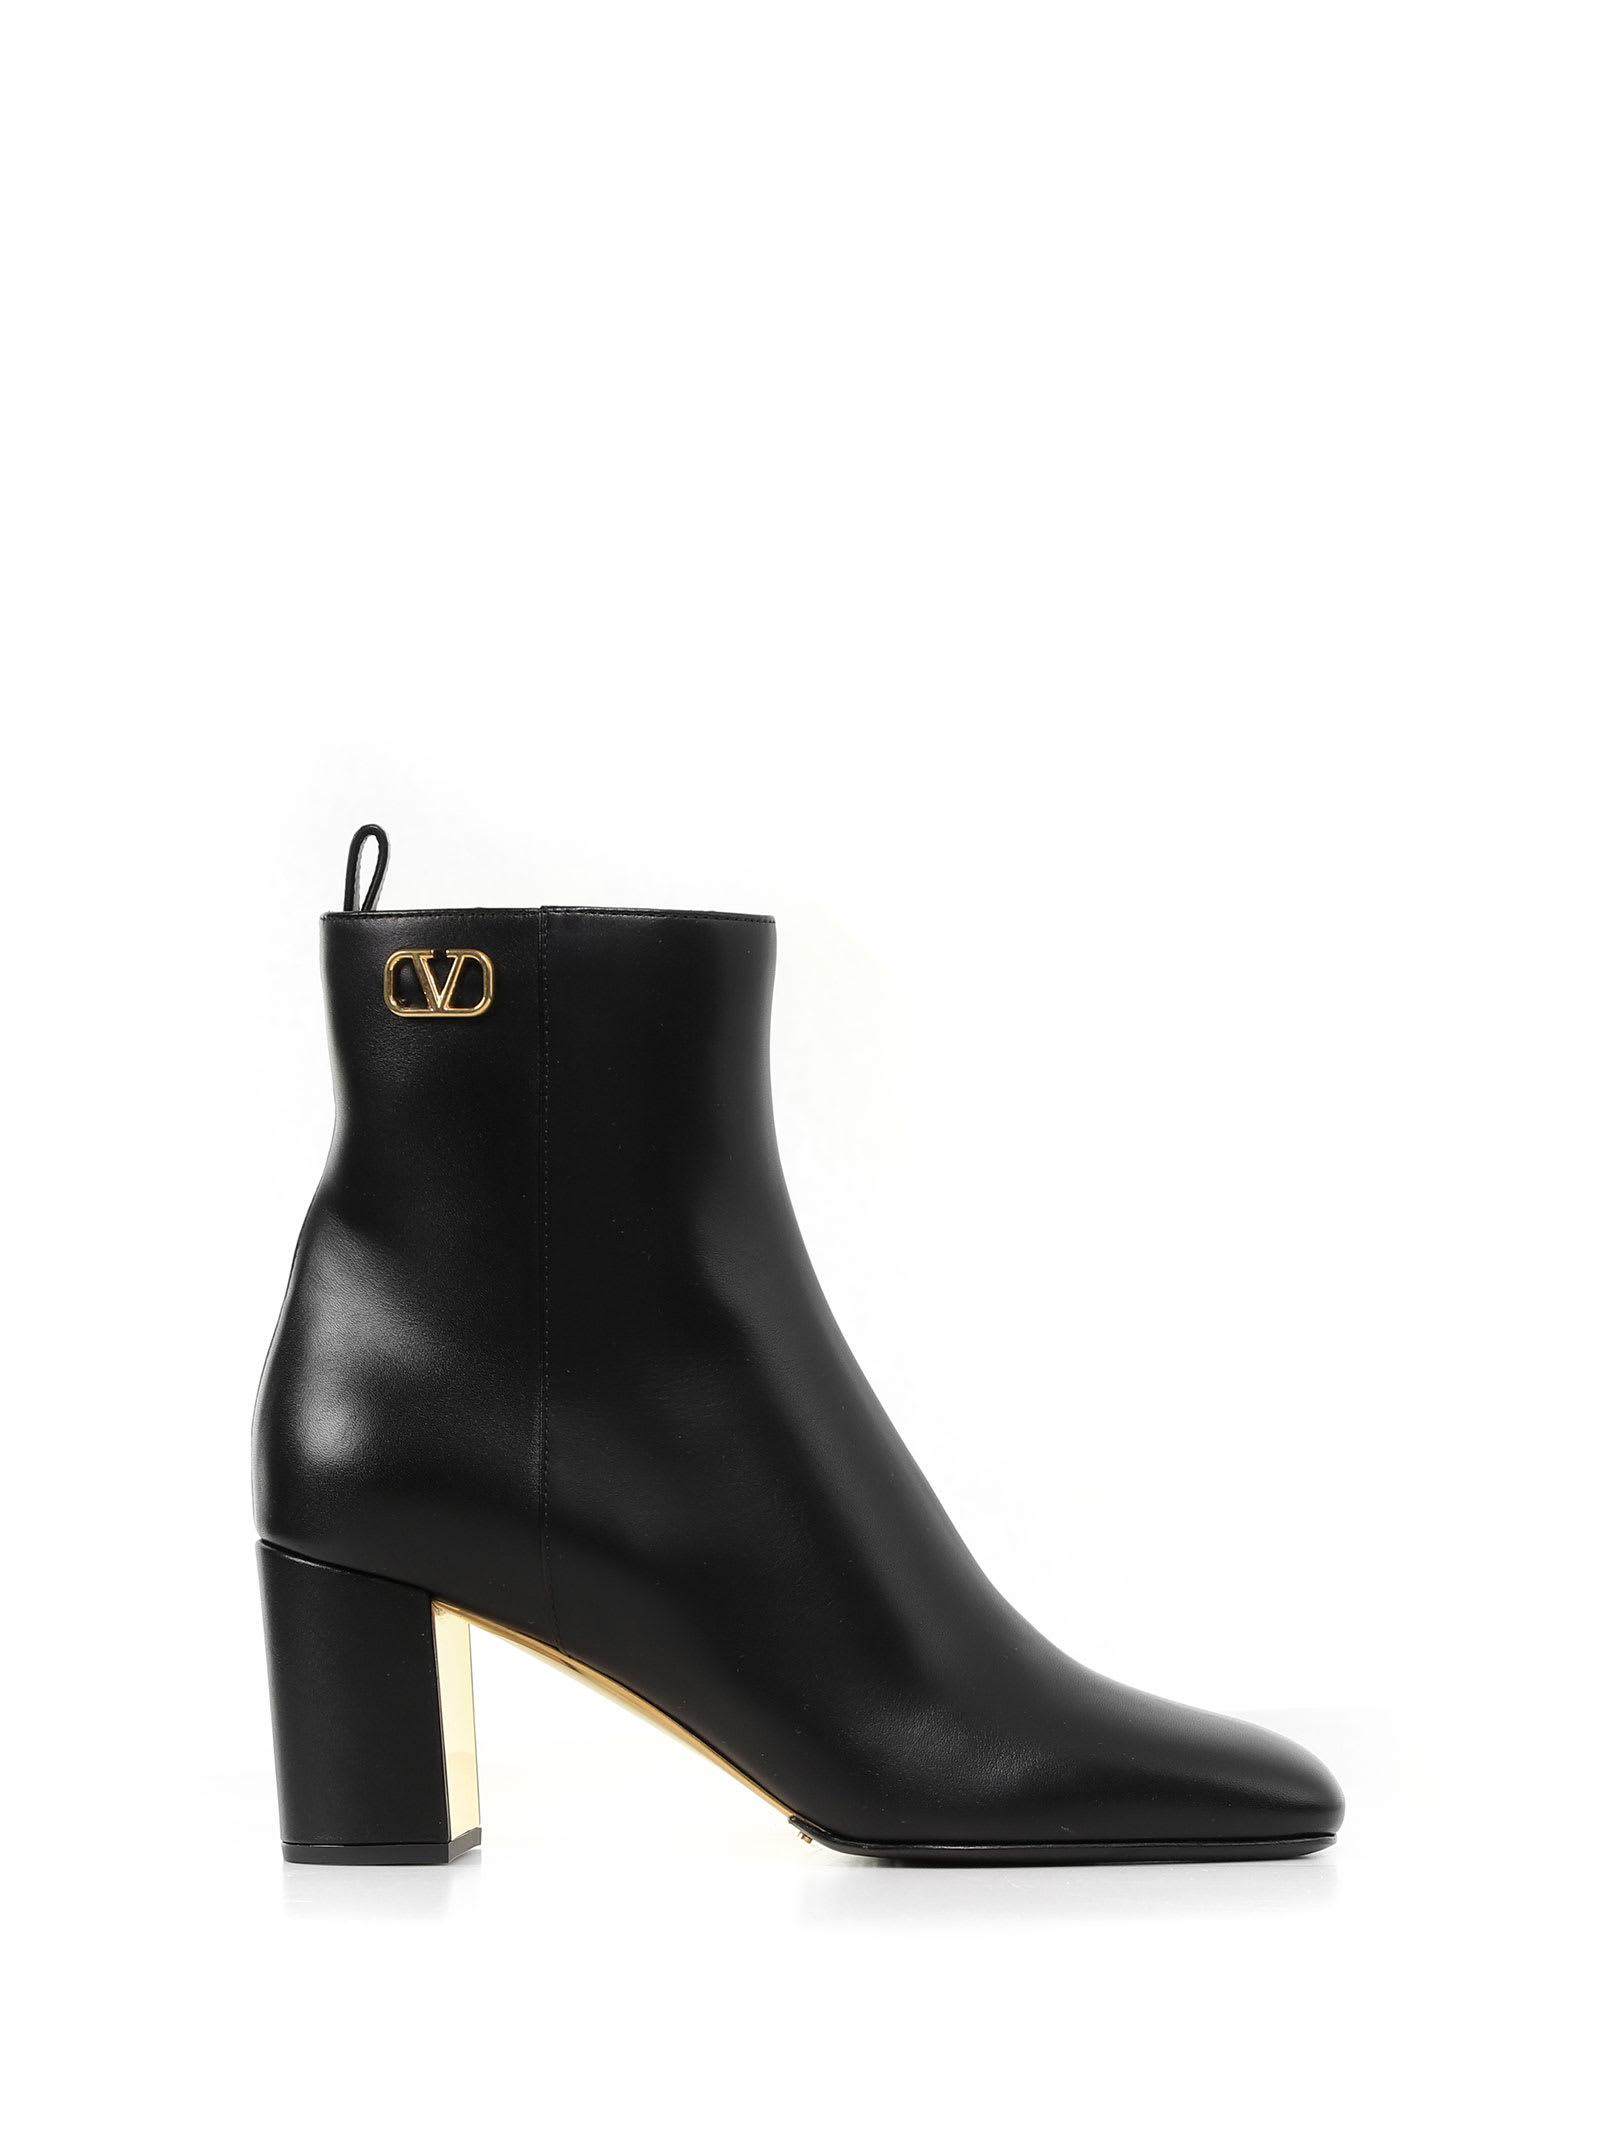 Valentino Garavani Ankle Boot With Gold Toned Side Details